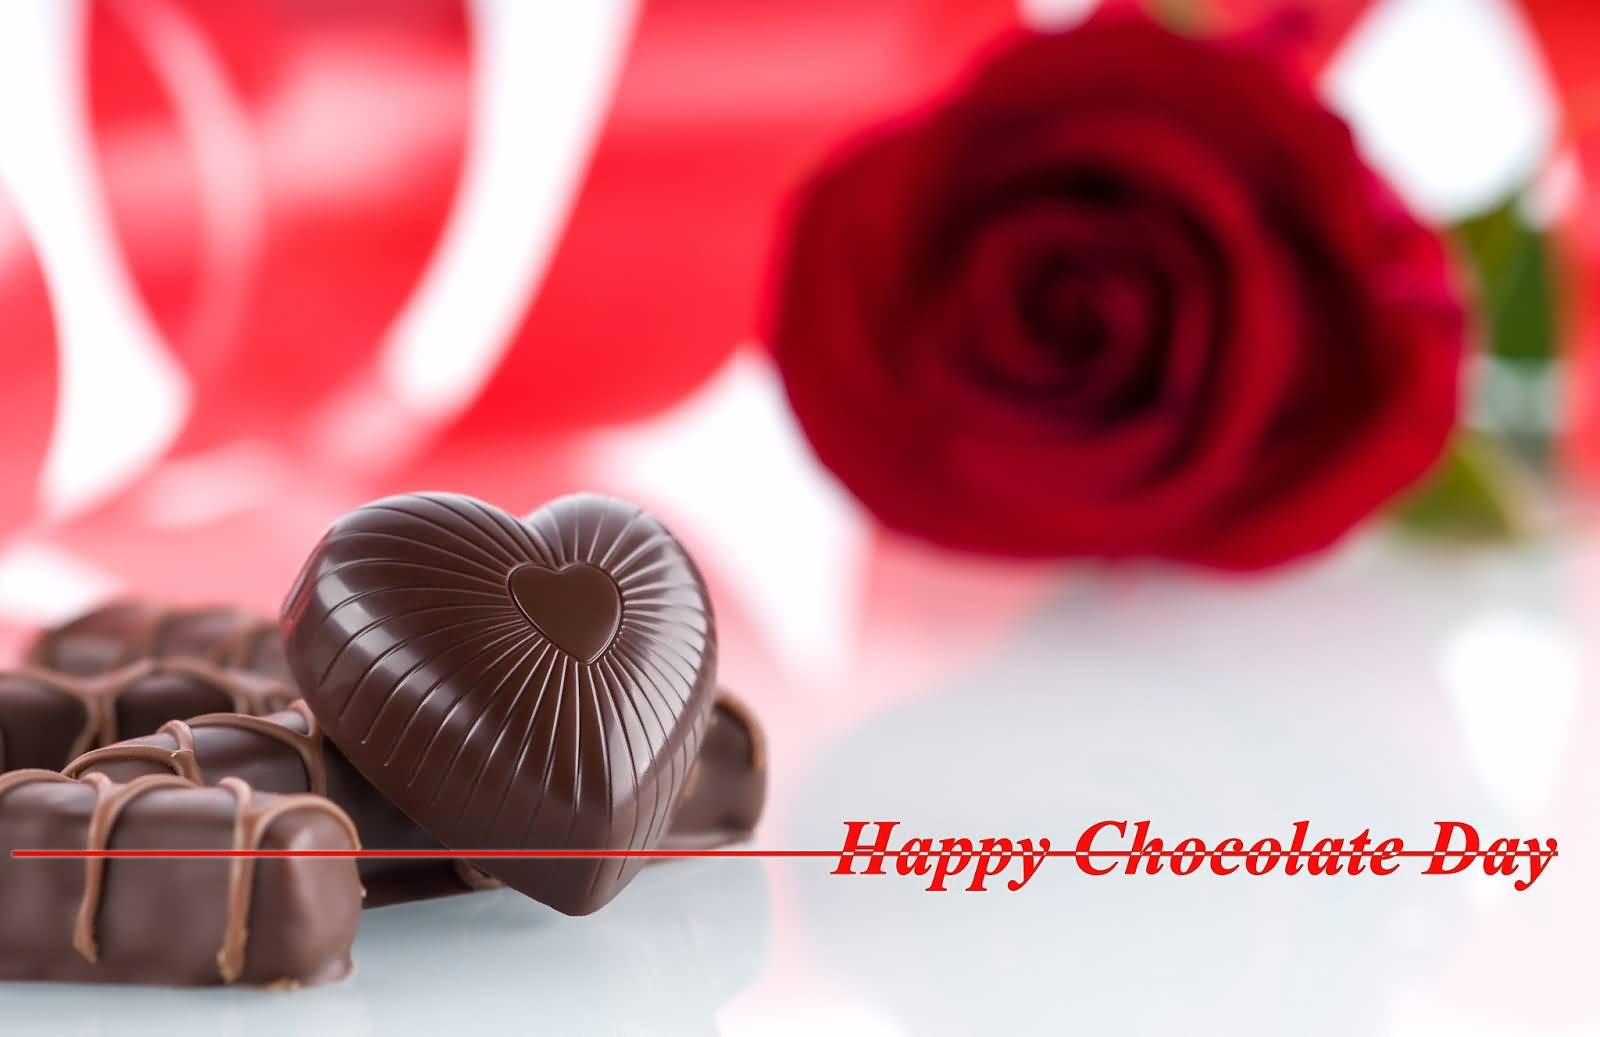 Happy Chocolate Day 9th February 2017